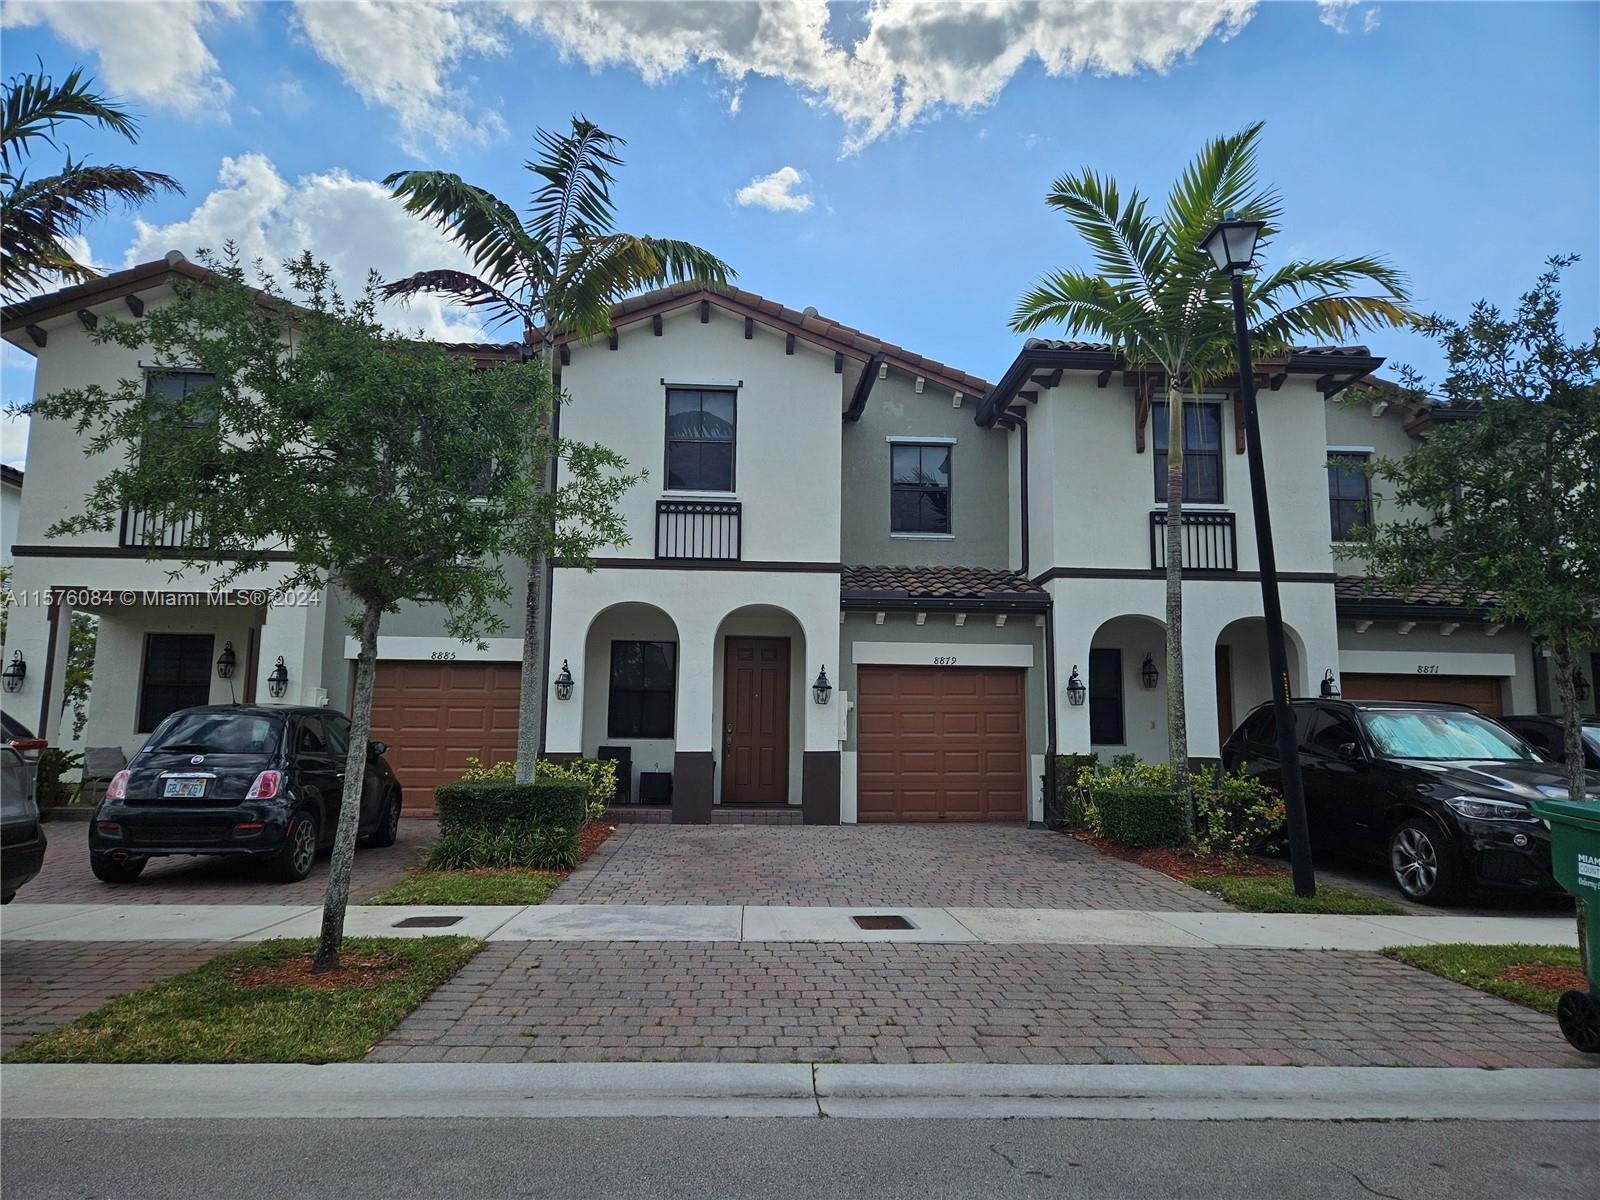 Photo of 8879 NW 102nd Ct in Doral, FL